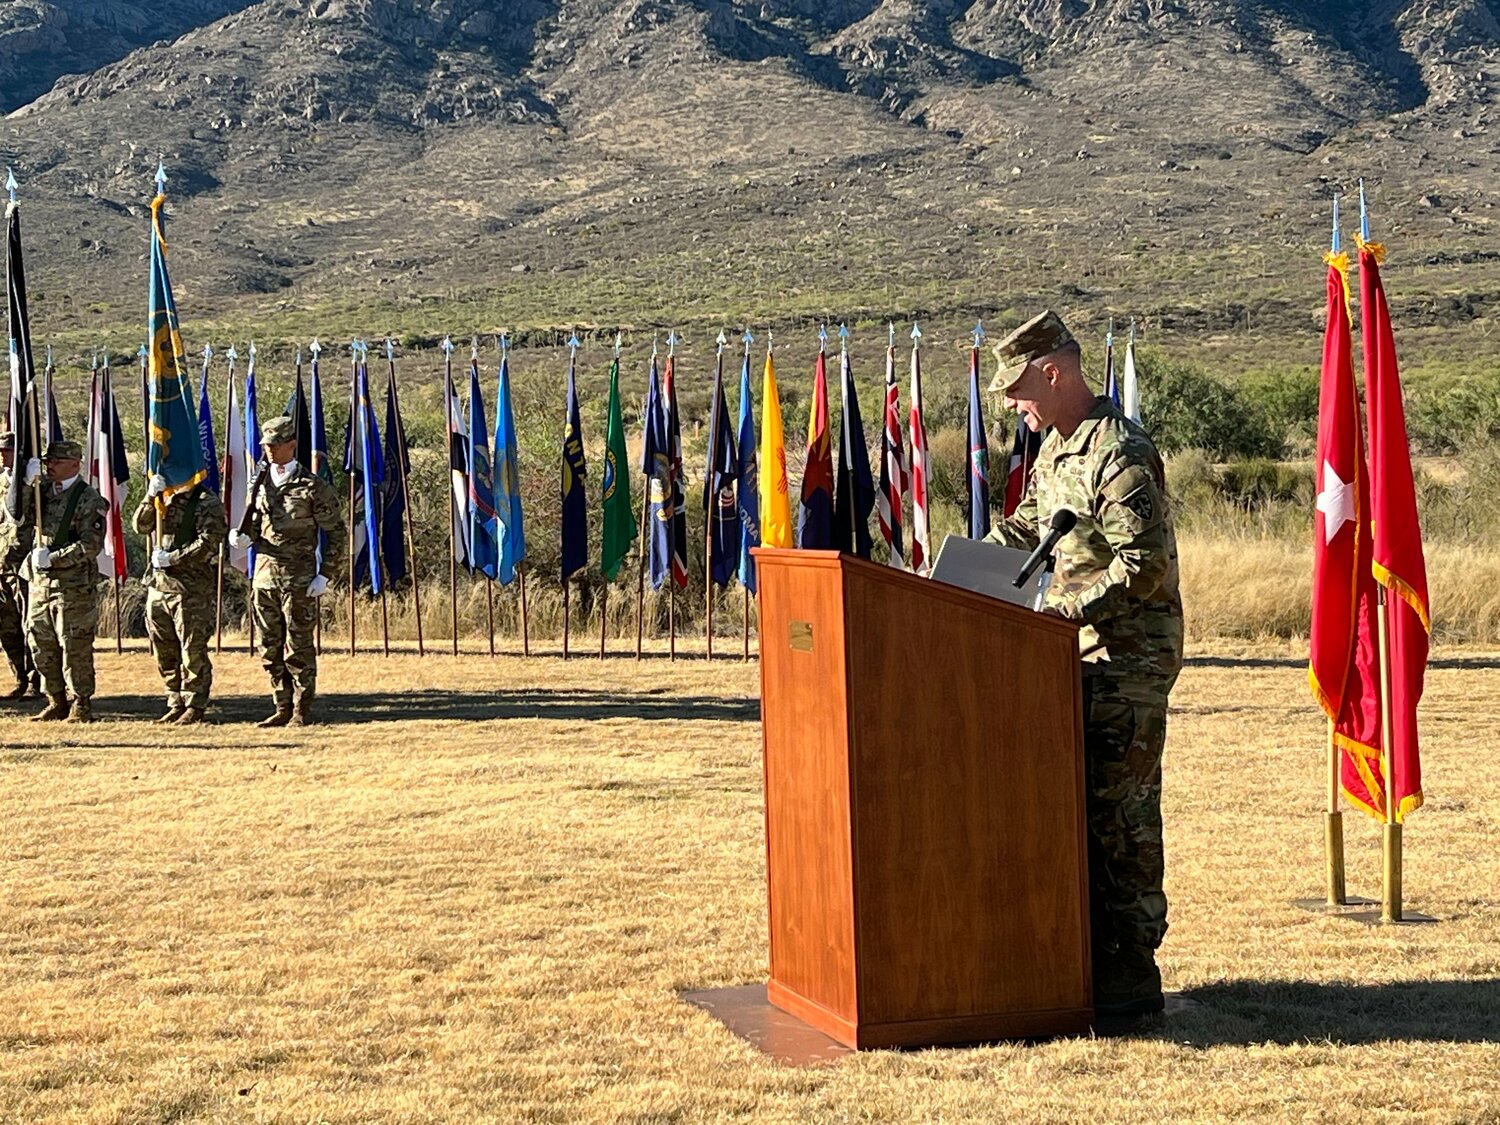 Major Gen. James J. Gallivan, commanding general for the Army Test & Evaluation Command, speaks during the Change of Command Ceremony welcoming the new commander.